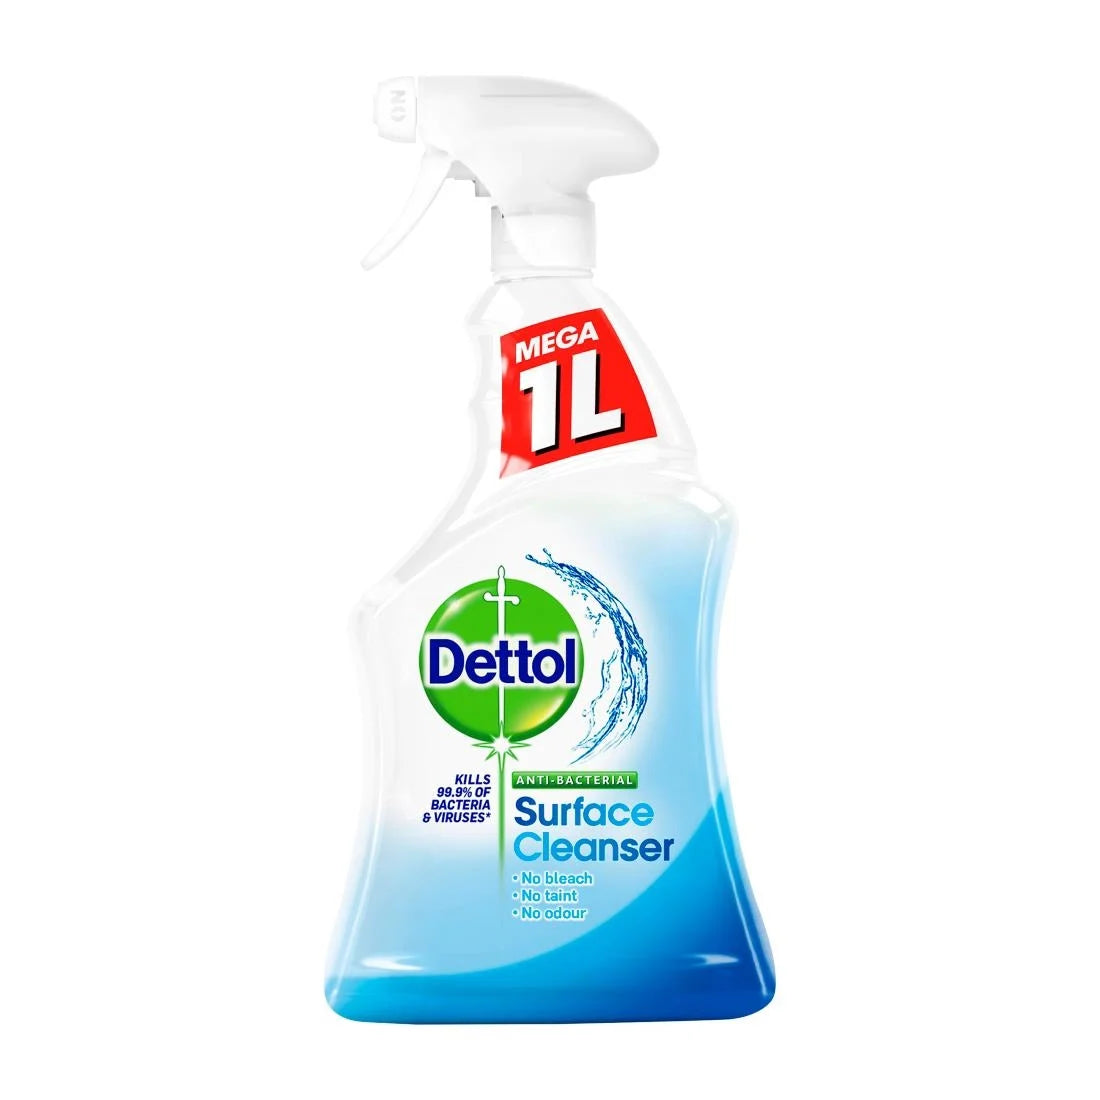 Dettol Antibacterial Surface Cleaner Ready To Use 1Ltr Pack Quantity: 1 x 1Ltr JD Catering Equipment Solutions Ltd